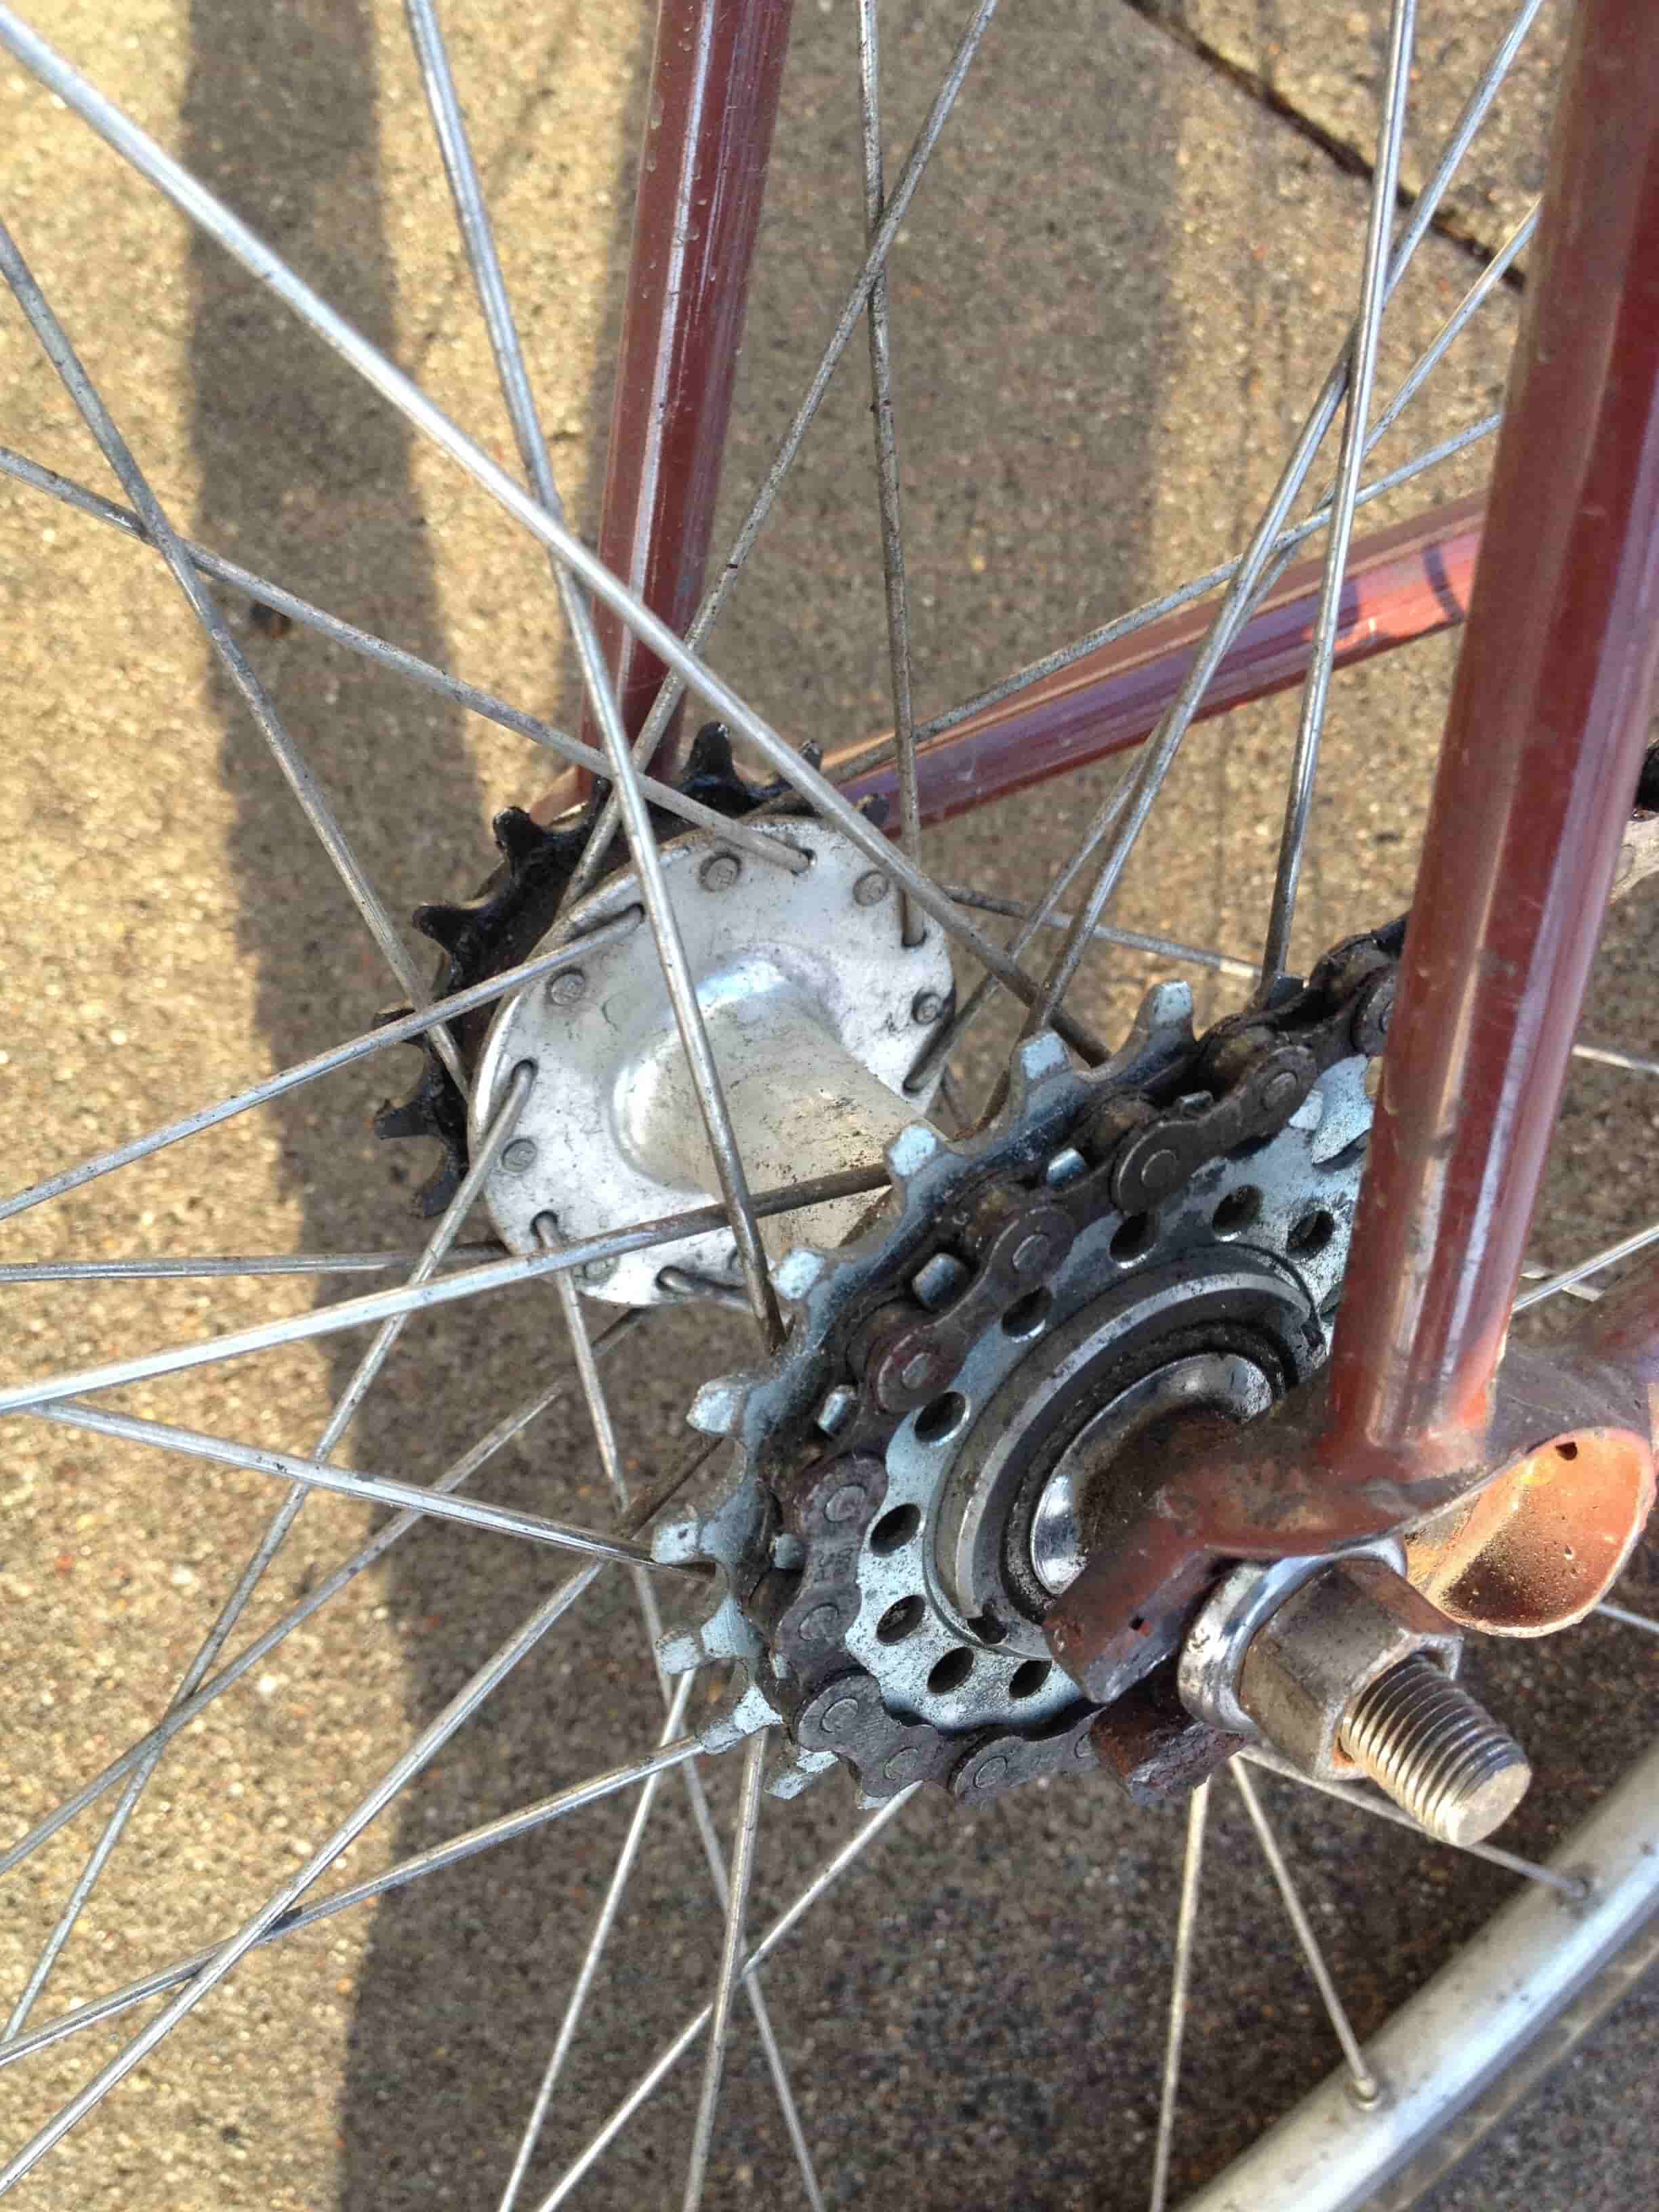 Close up, right side view of the rear wheel, with a flip-flop hub, on a red Surly Steamroller bike